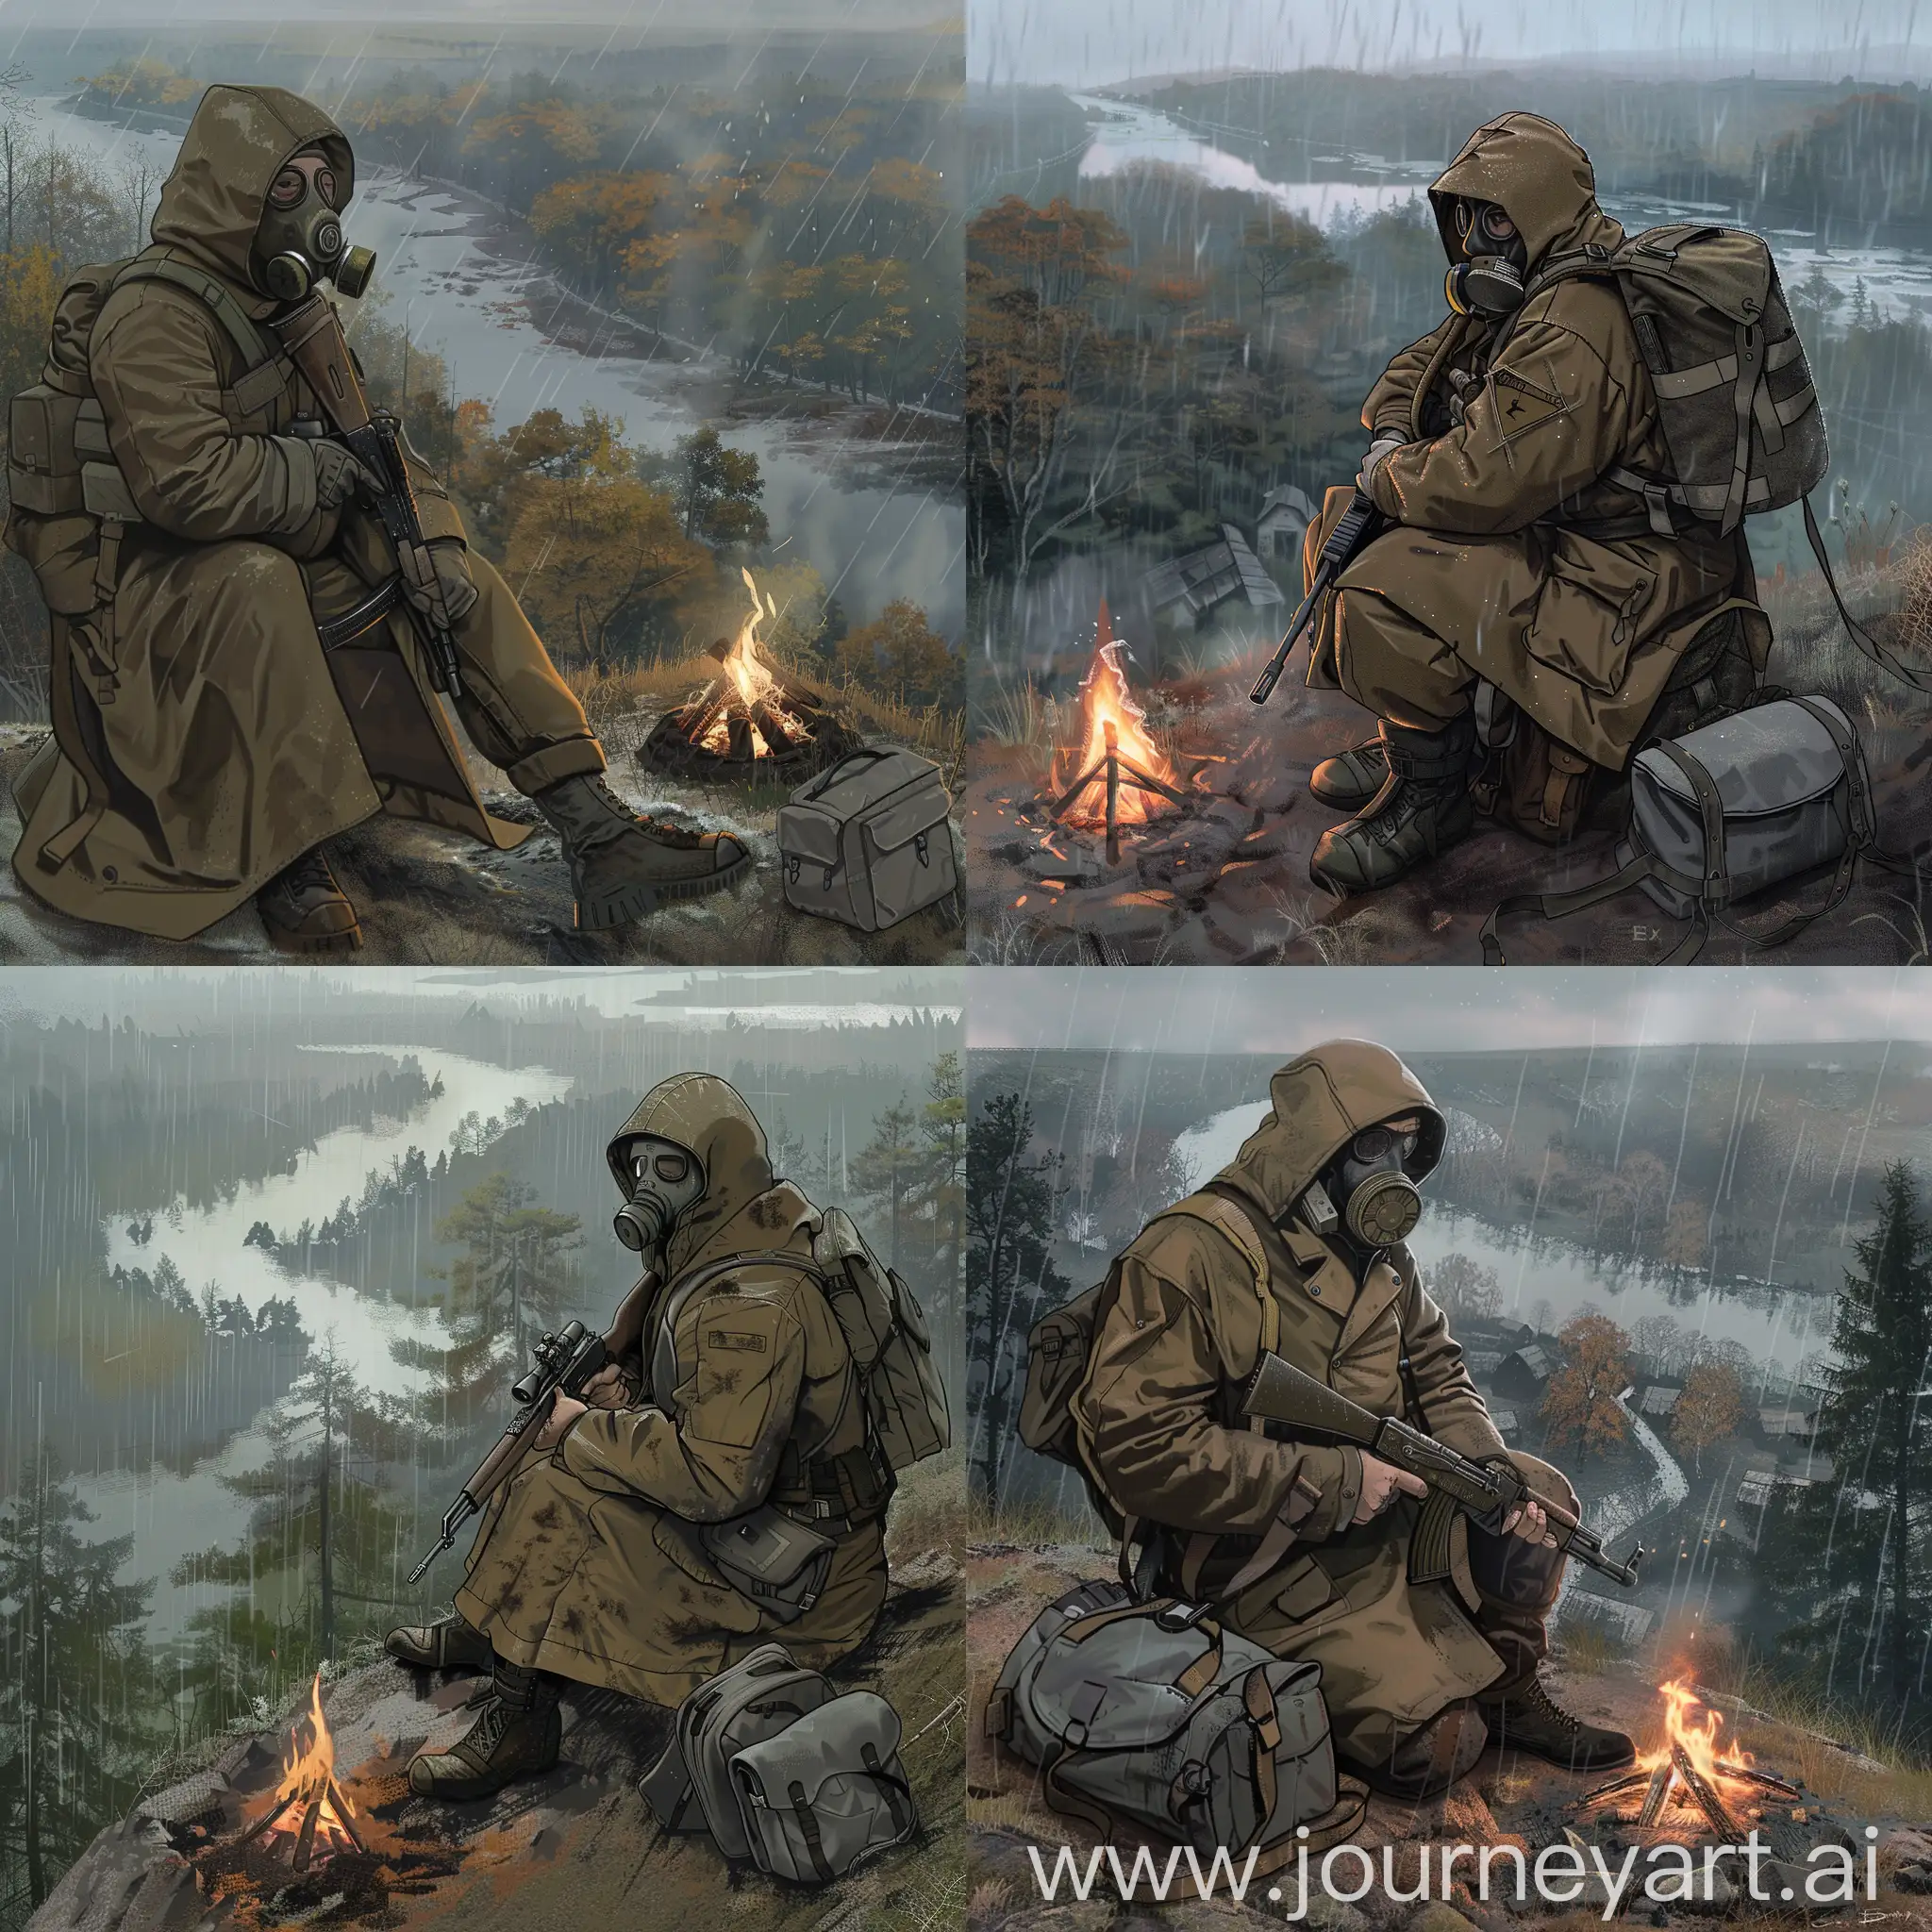 Stalker art, stalker are sitting on a hill by a campfire, stalker is wearing a military dirty brown raincoat with a gasmask on his face, he has a rifle in his hands, a small gray backpack lies next to him, the weather is gloomy autumn rain, from the hill, where the stalker are sitting, there is a view of the forest and an abandoned swamp village standing in the distance.